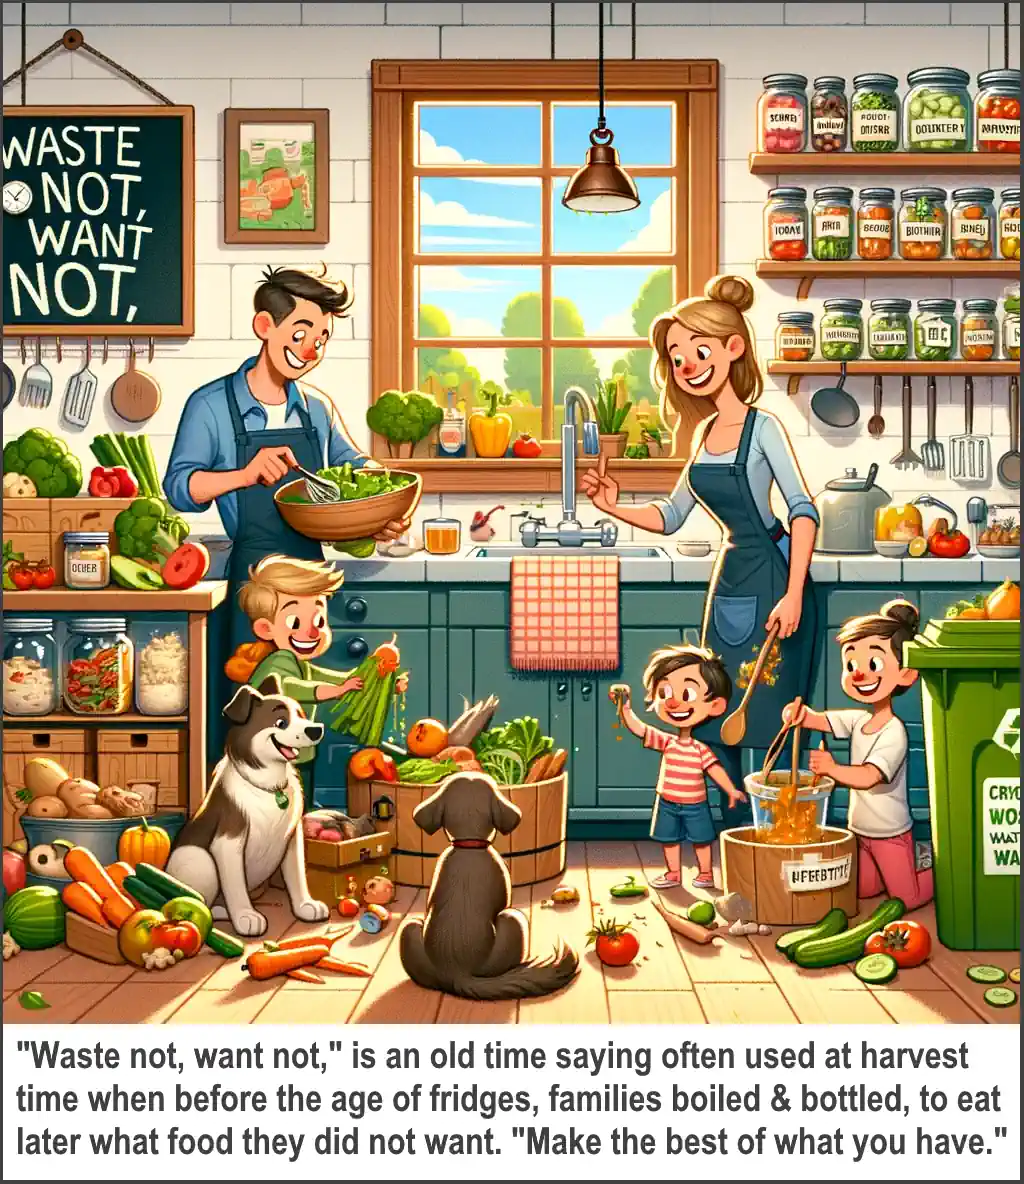 Our waste not want not cartoon explains the old timer meaning of the phrase.